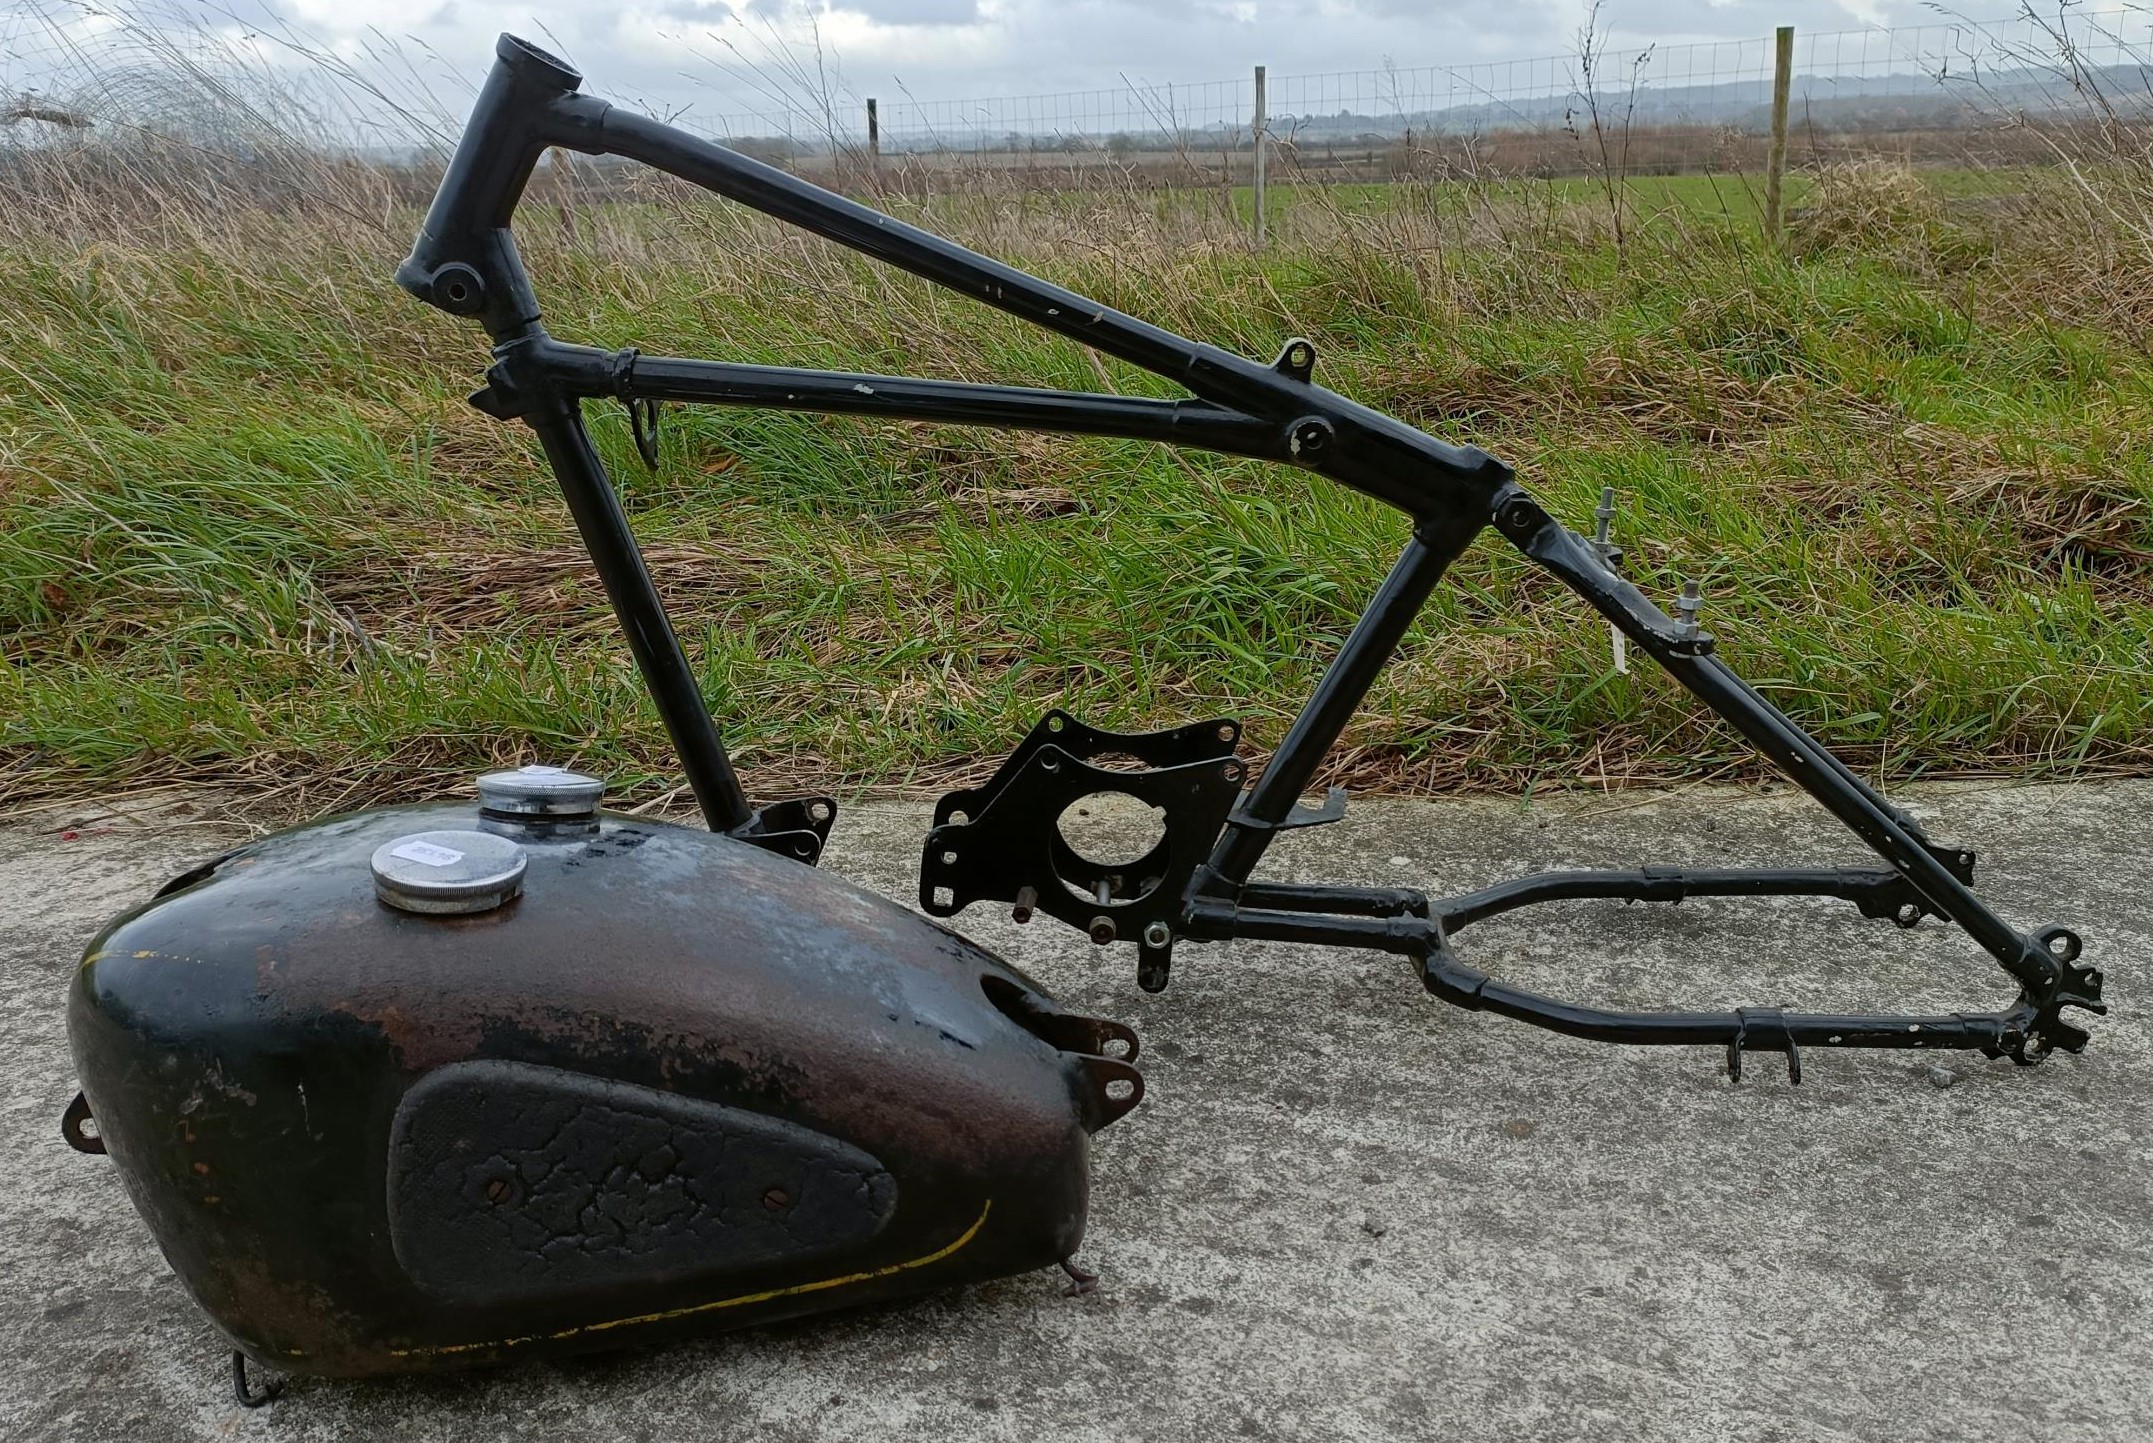 c.1930 Velocette GTP tank and a frame